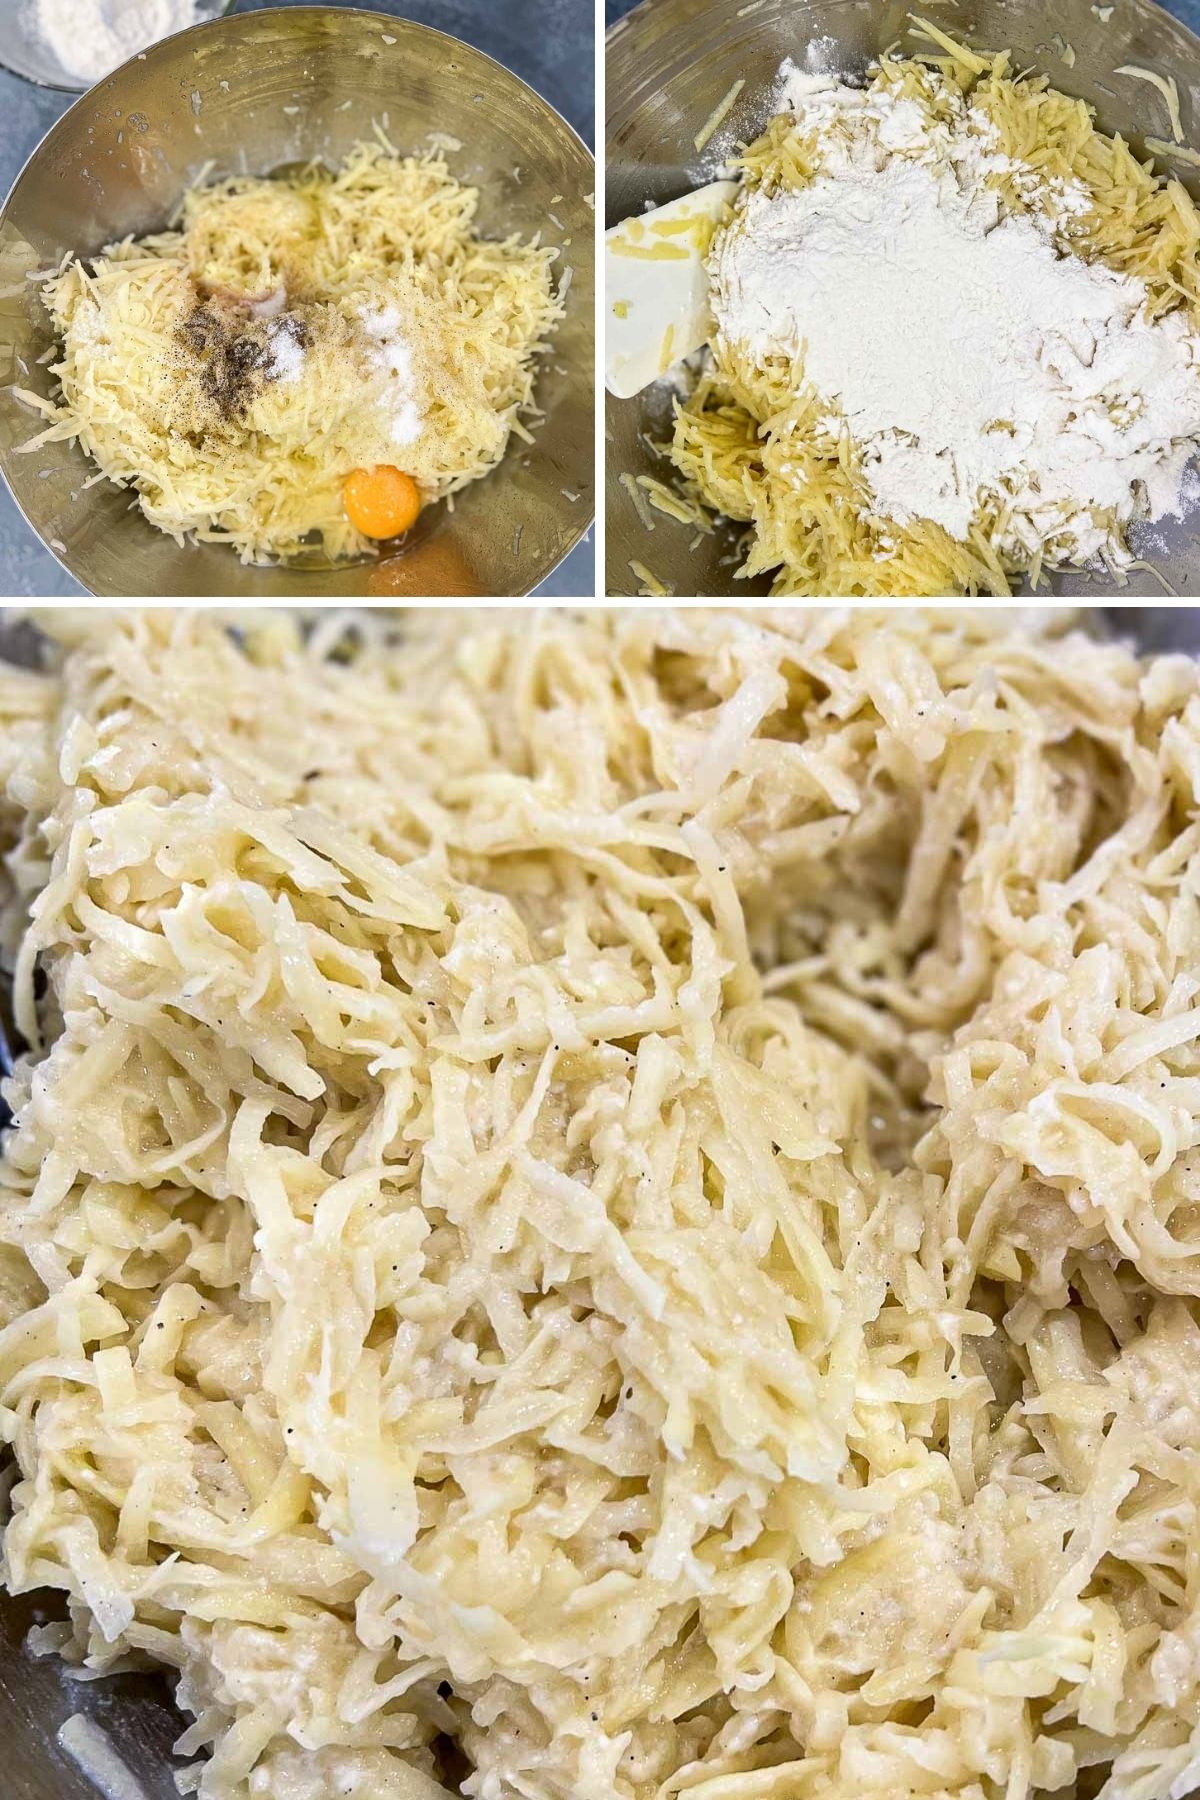 Collage of 3 pictures to show how shredded potato mixture should look